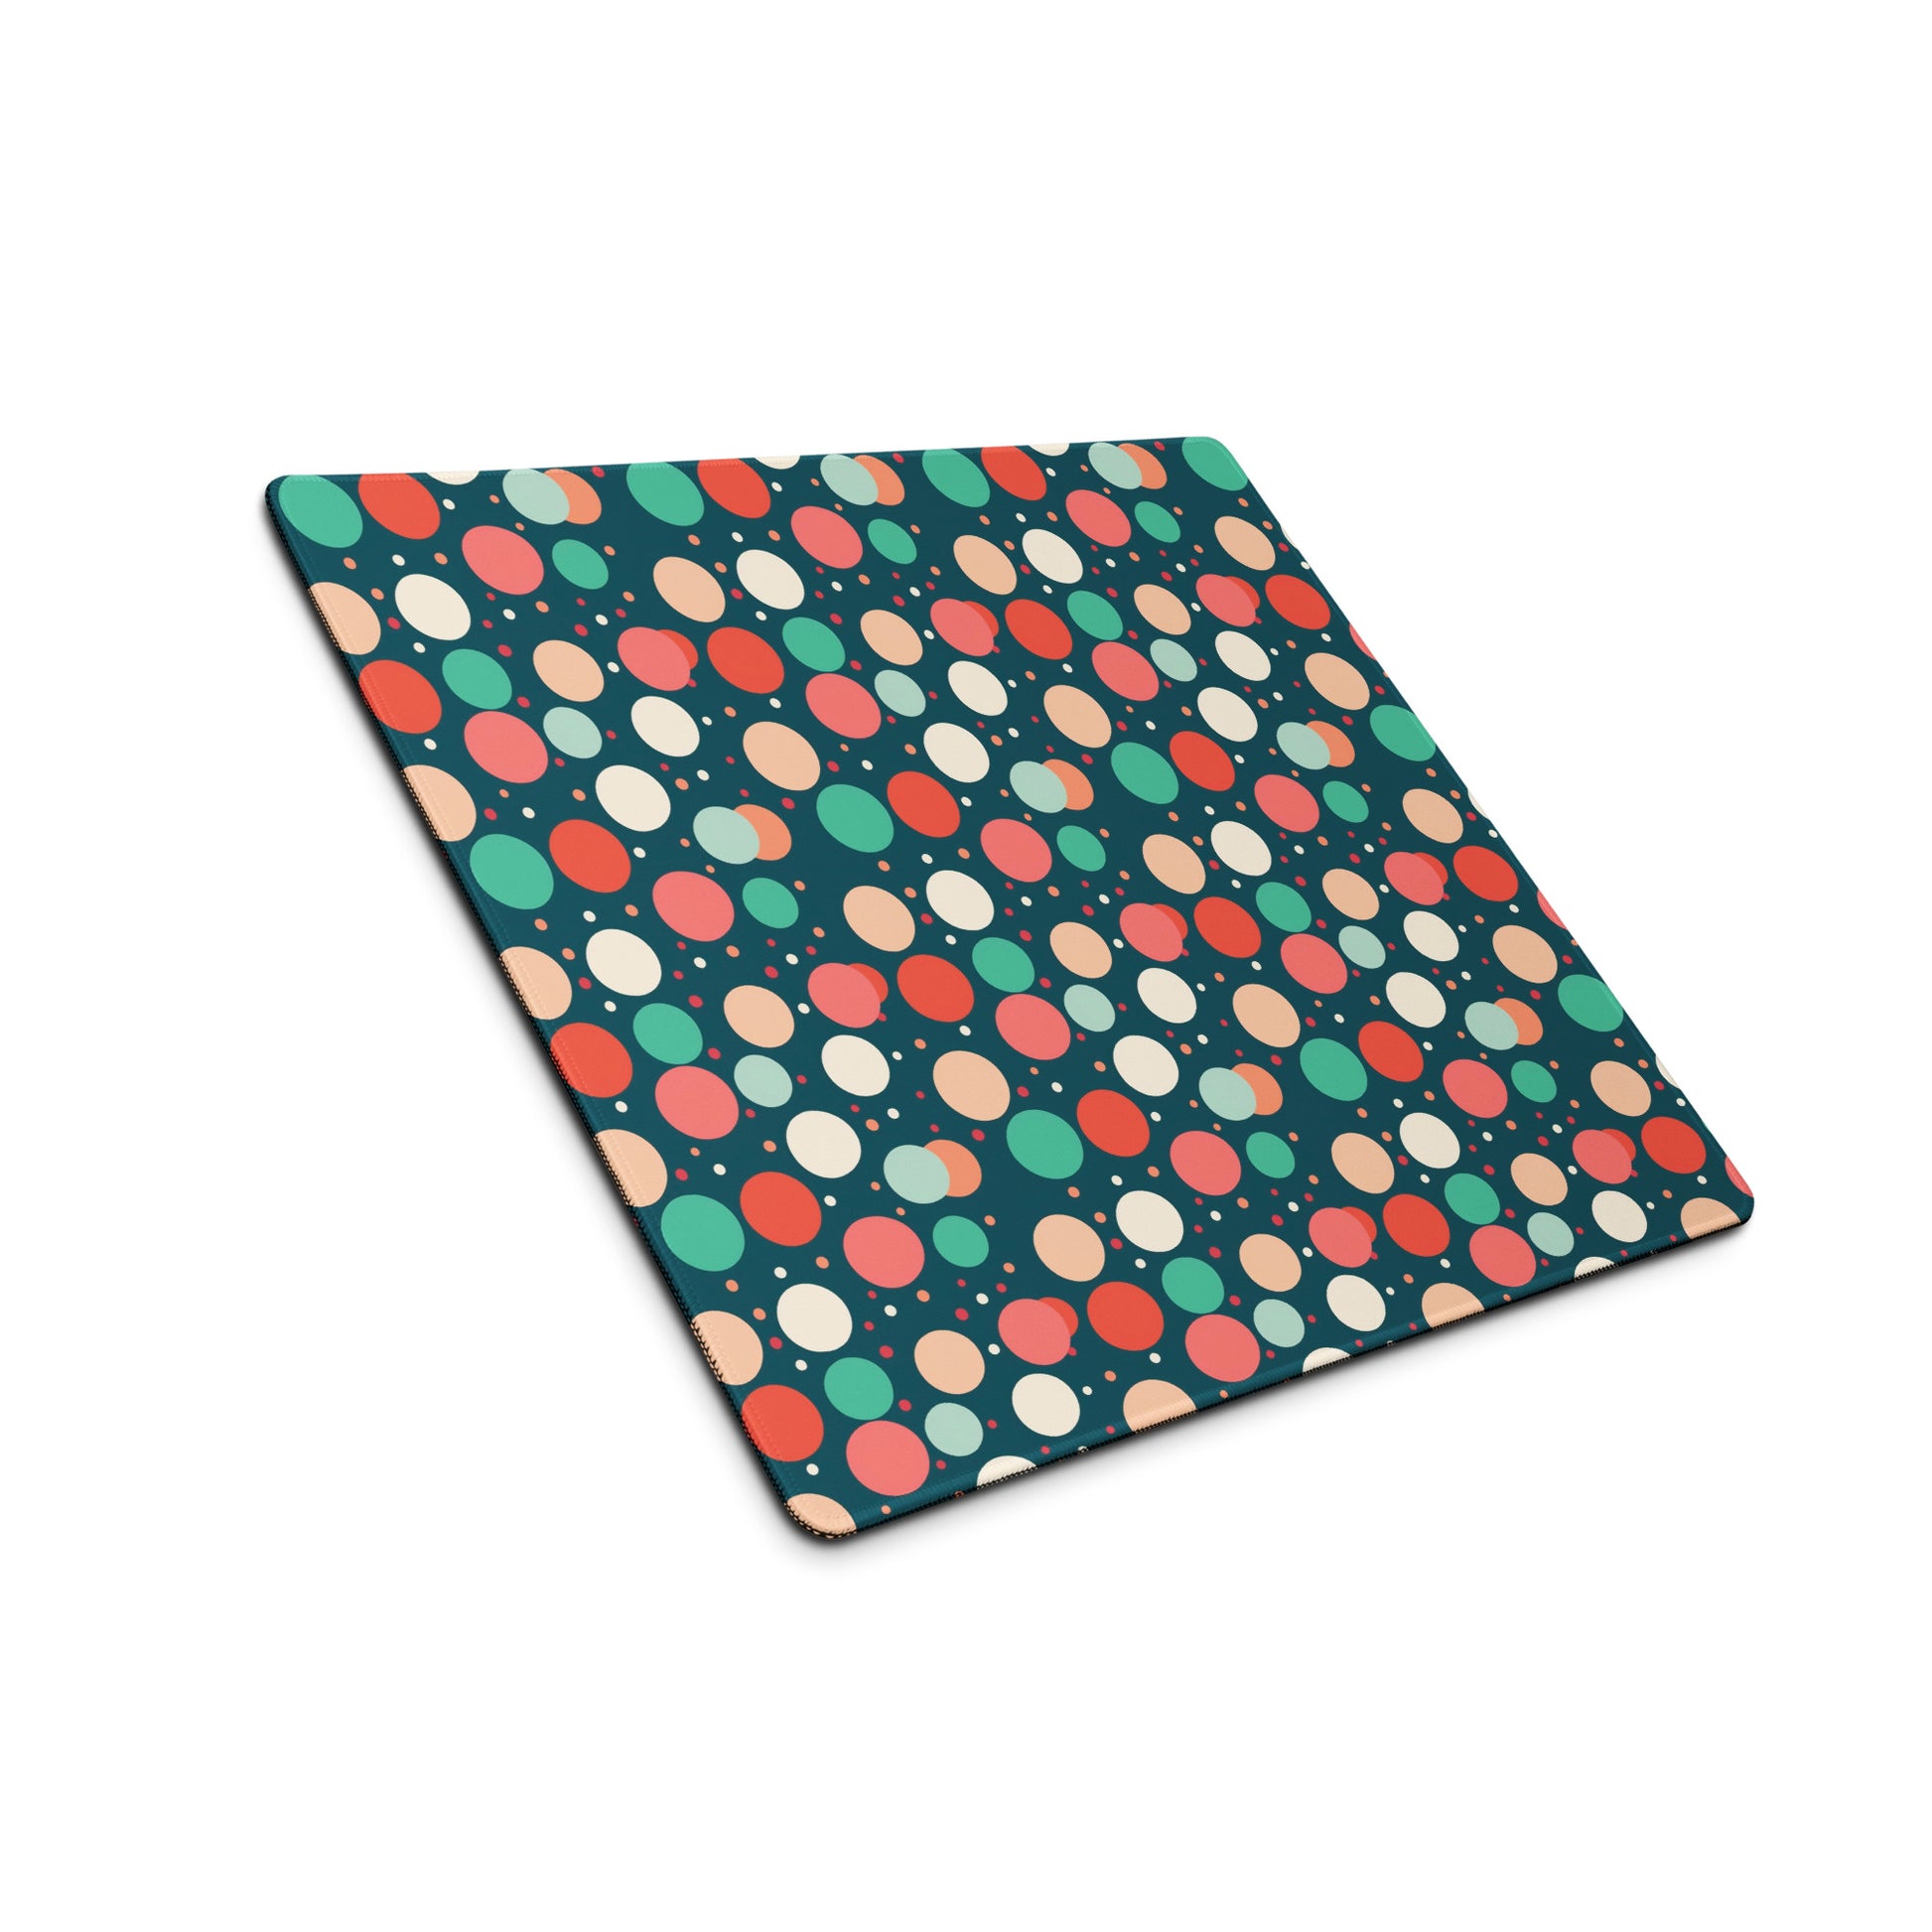  A 18" x 16" desk pad with red teal and yellow polka dot pattern sitting at an angle.